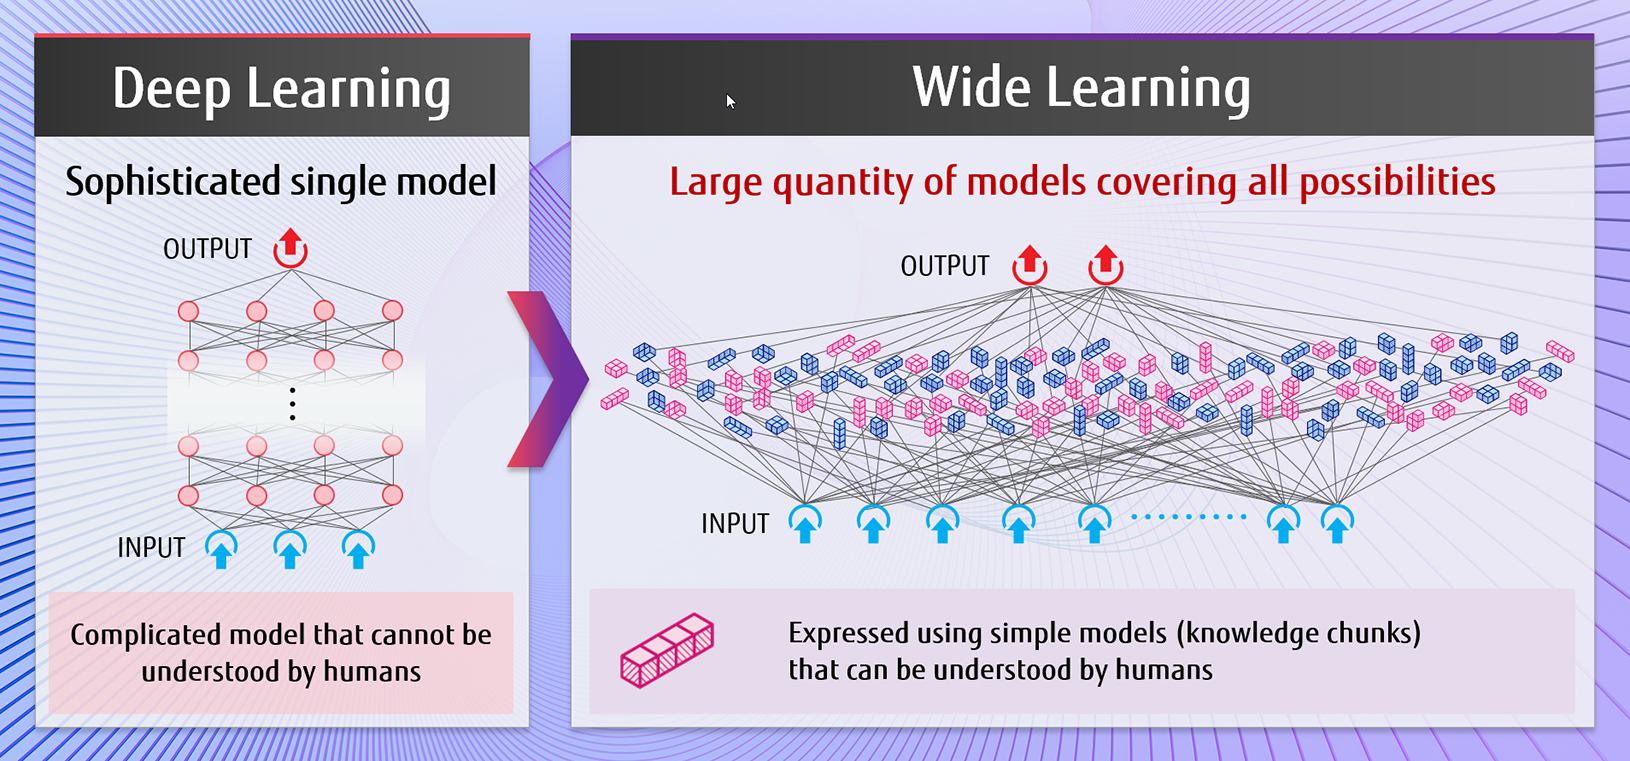 Breakthrough of machine learning – Wide Learning